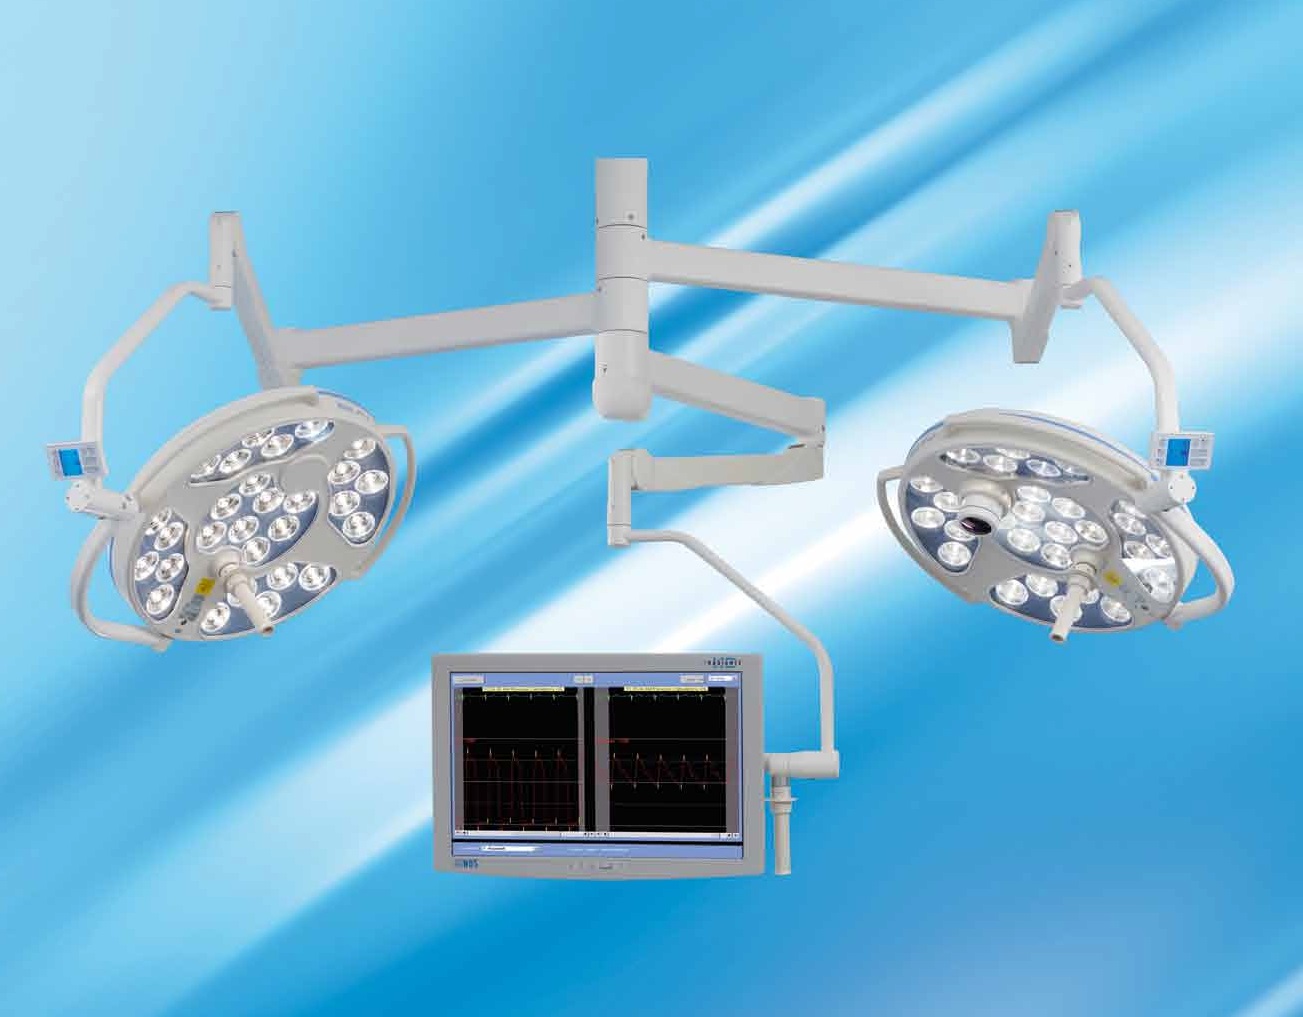 Mach LED 3/Mach LED 3 with integrated video system and monitor